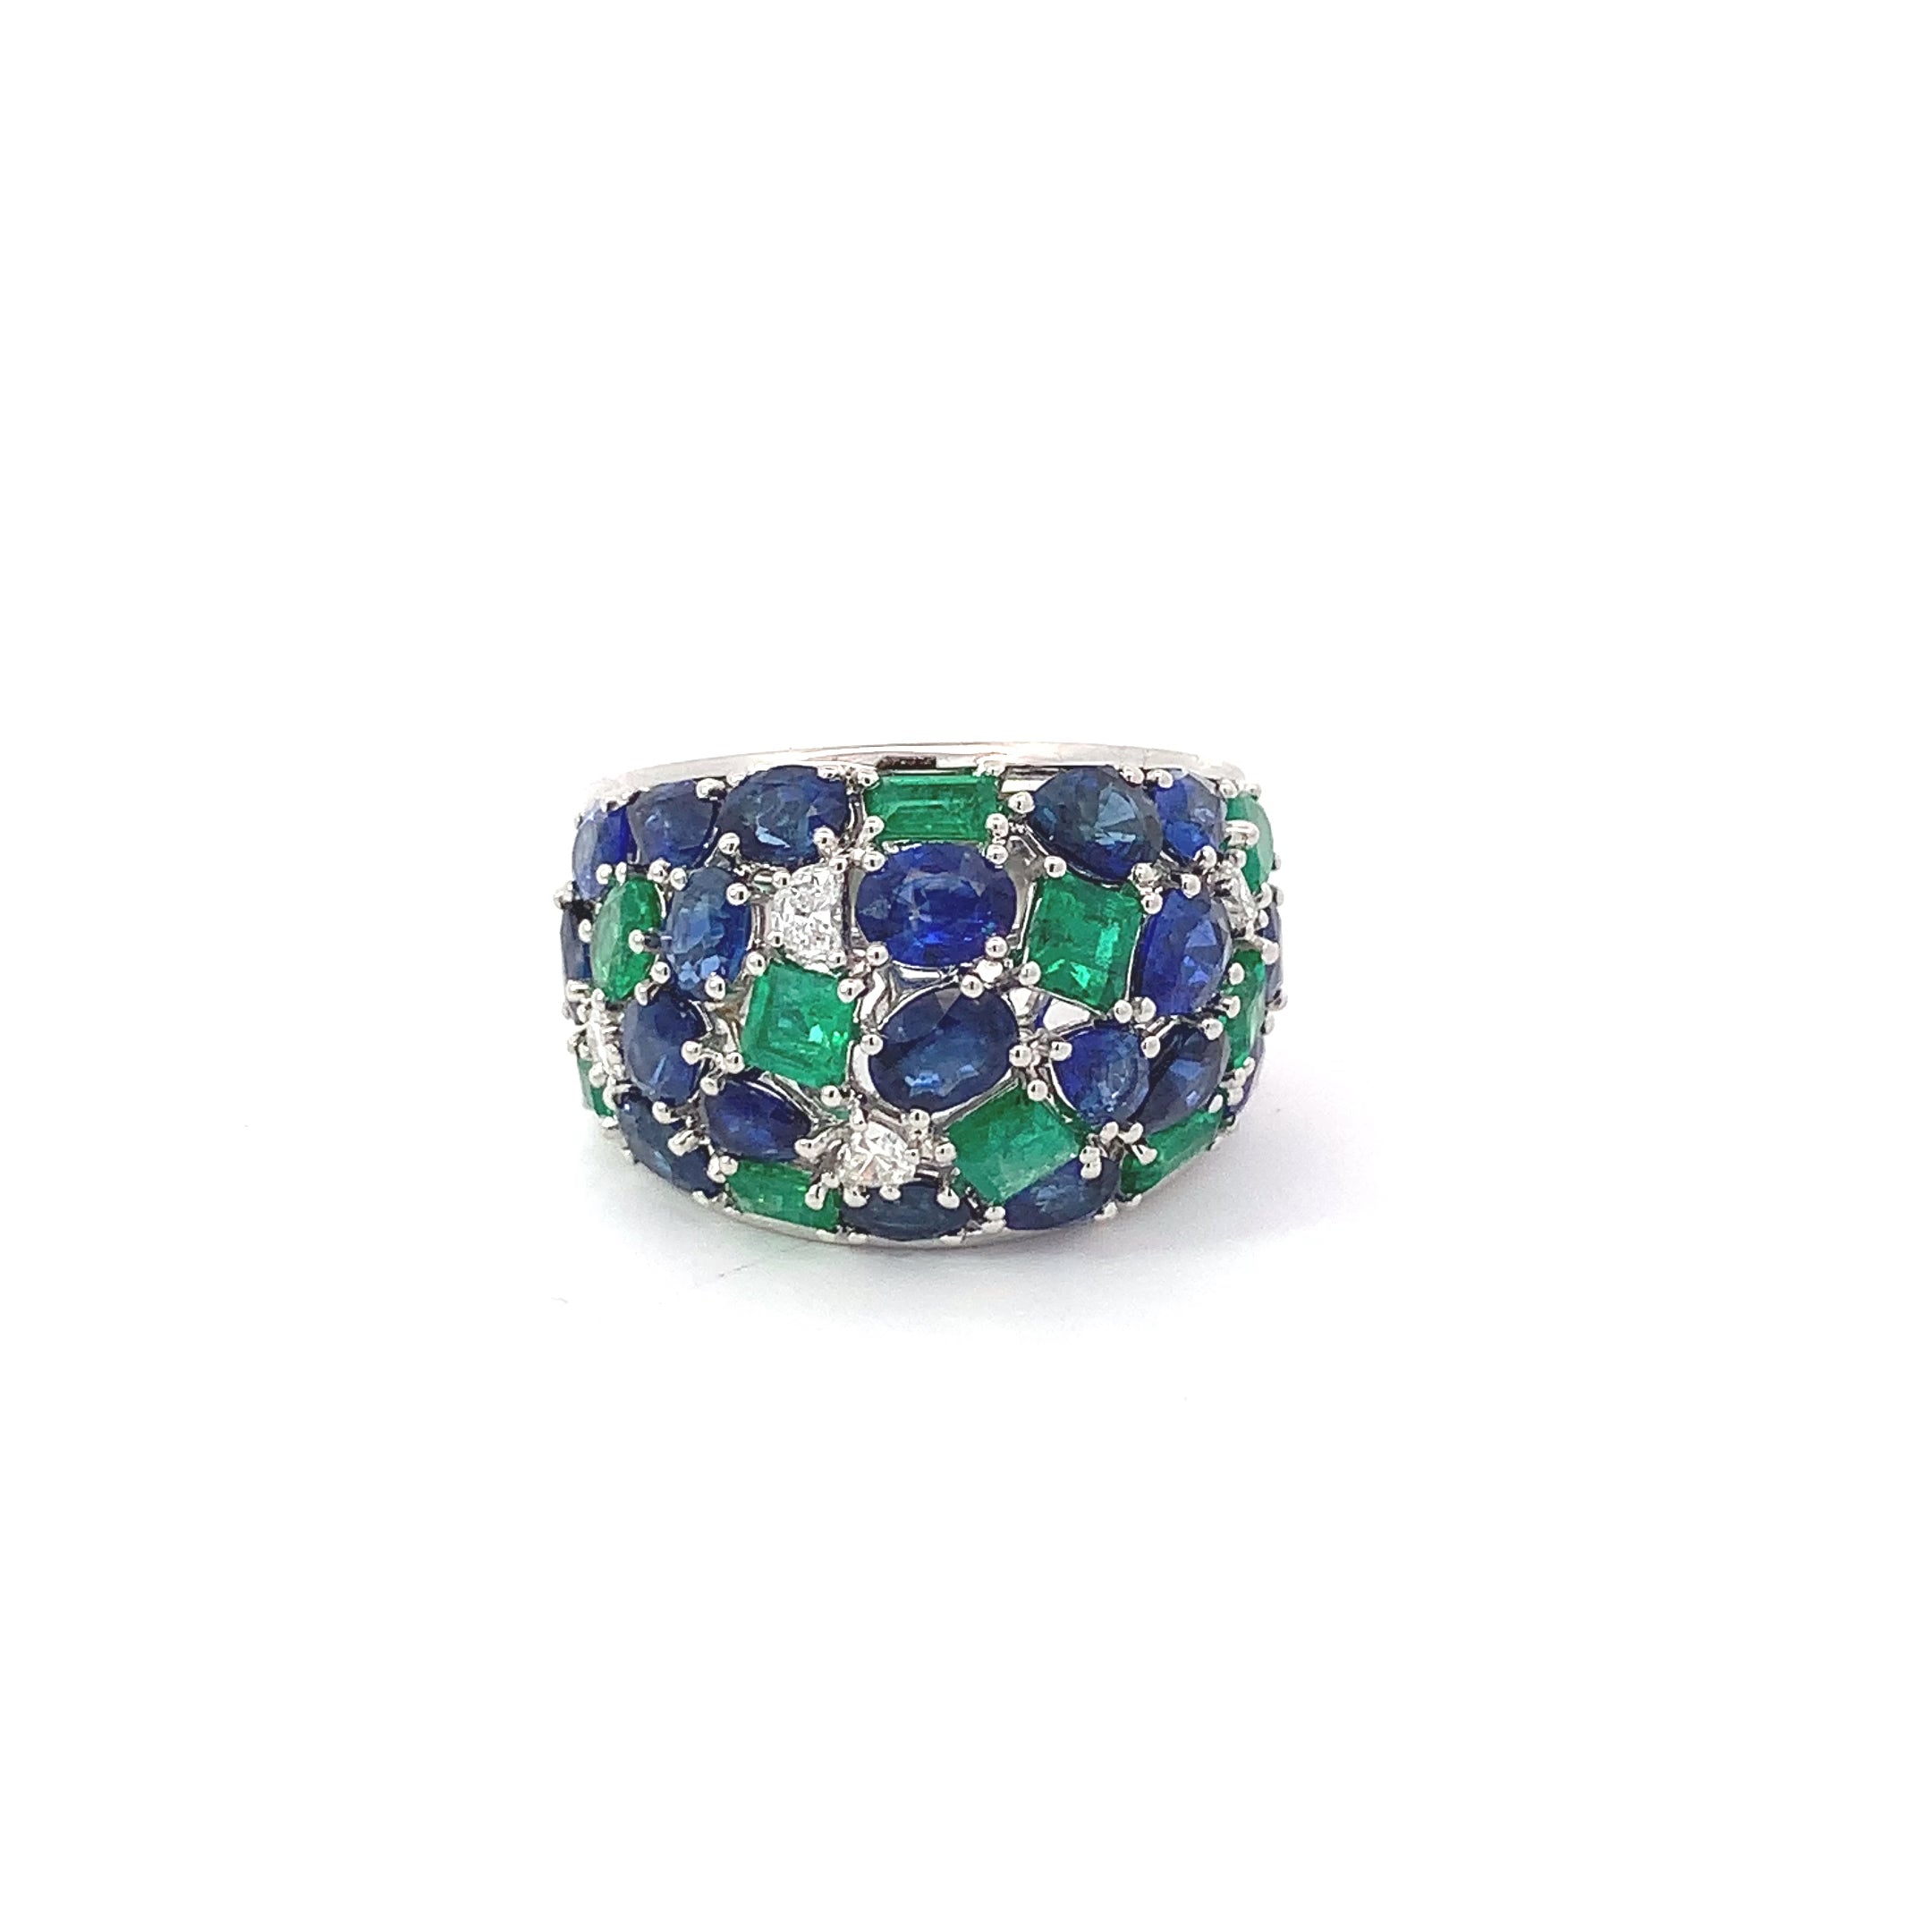 EMERALD AND SAPPHIRE RING